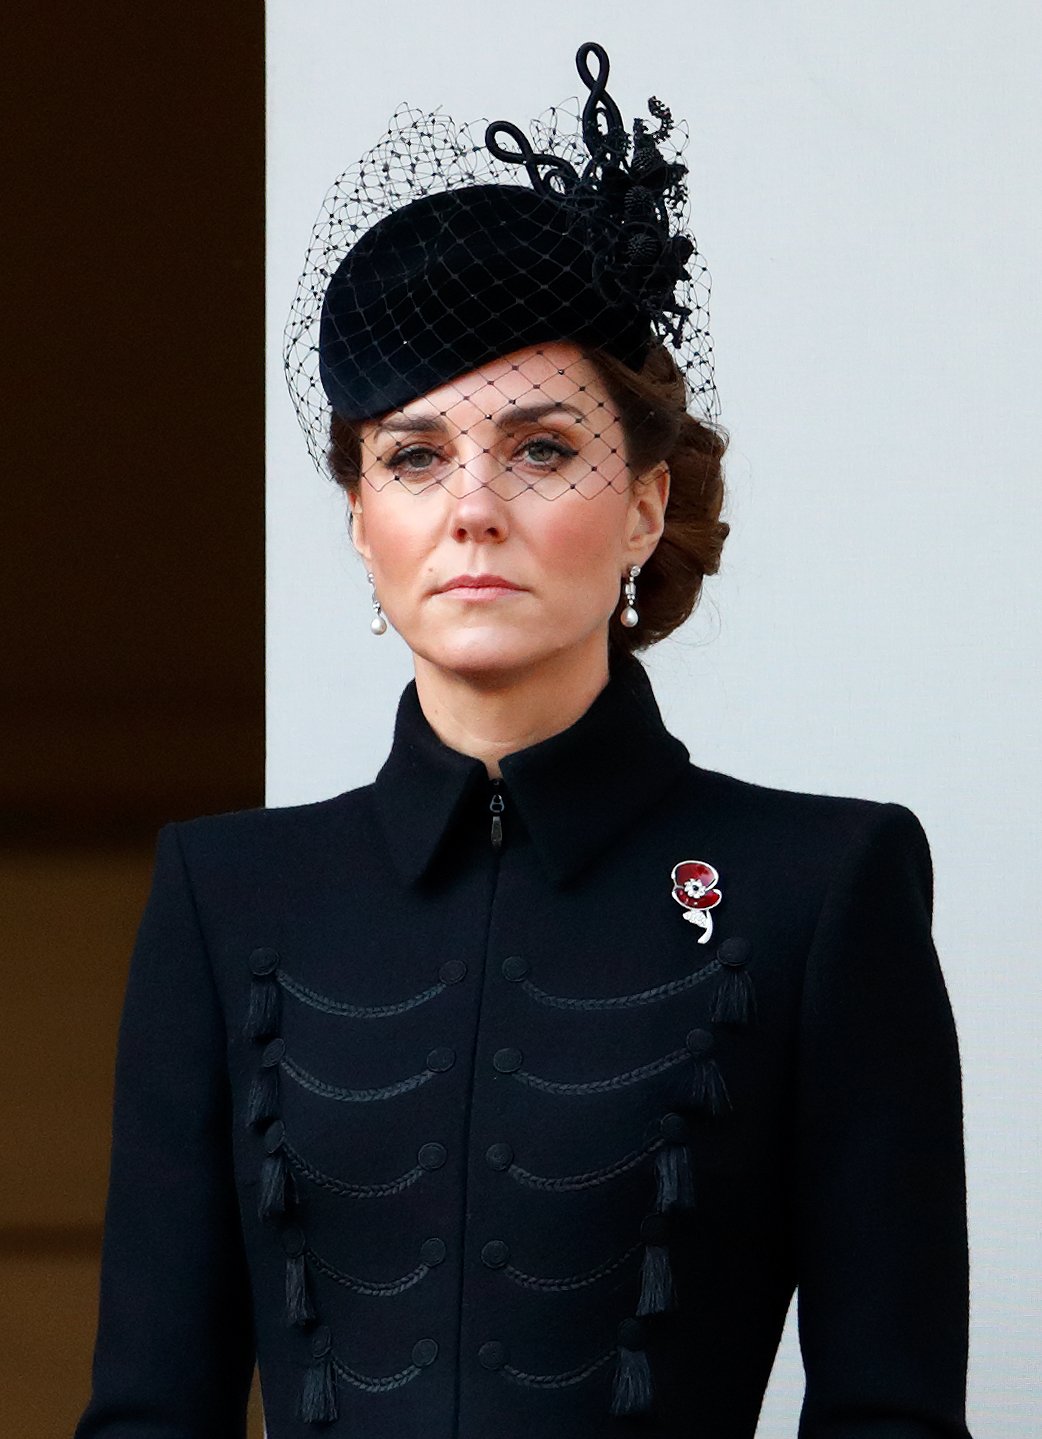 Kate Middleton attends the annual Remembrance Sunday service in London, England on November 10, 2019 | Photo: Getty Images